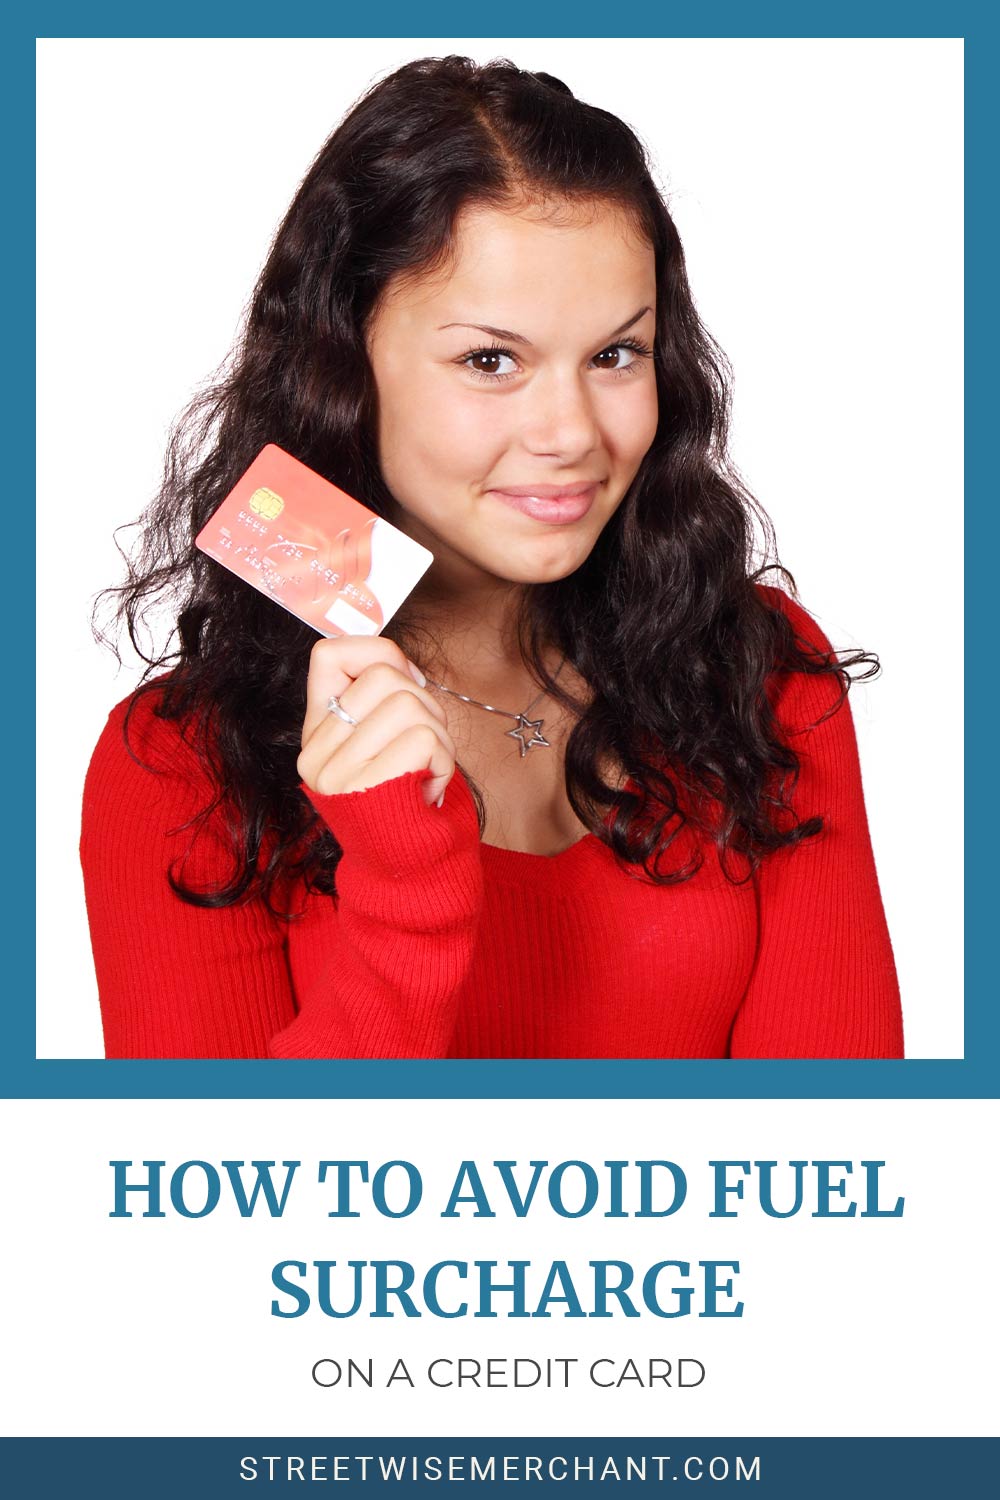 Lady wearing red sweater showing a credit card - How to Avoid Fuel Surcharge On it.